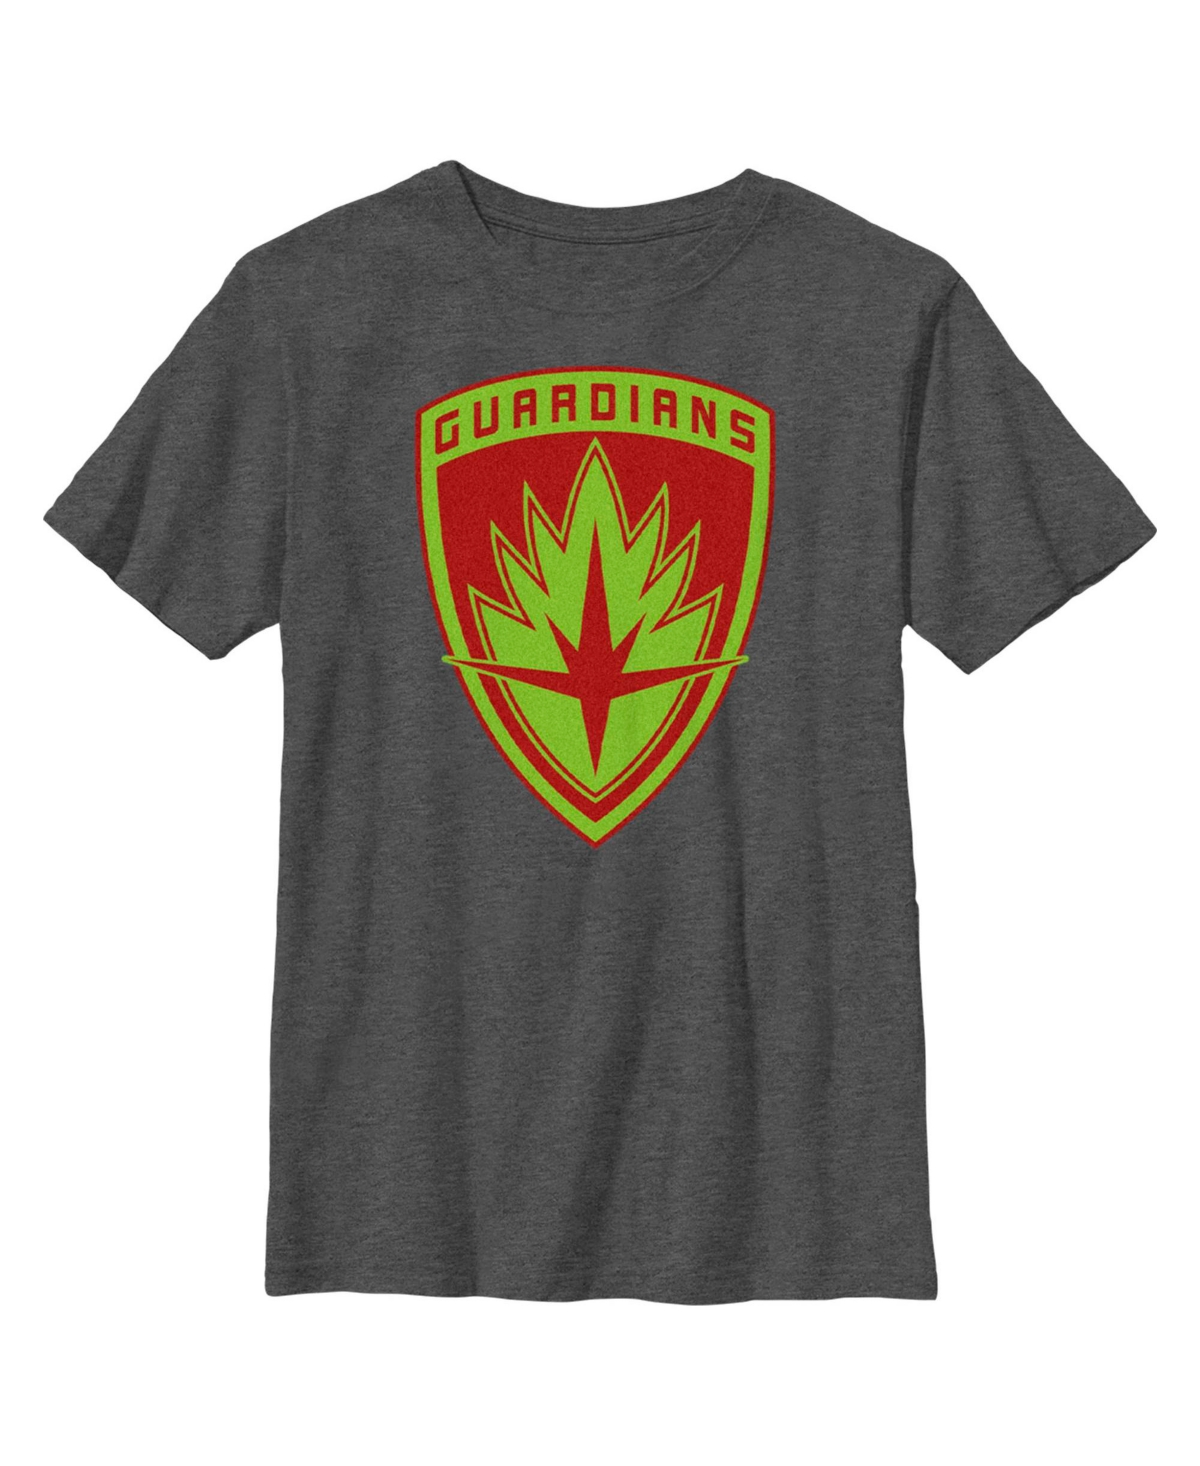 Boy's Guardians of the Galaxy Holiday Special Guardians Badge Child T-Shirt - Charcoal heather